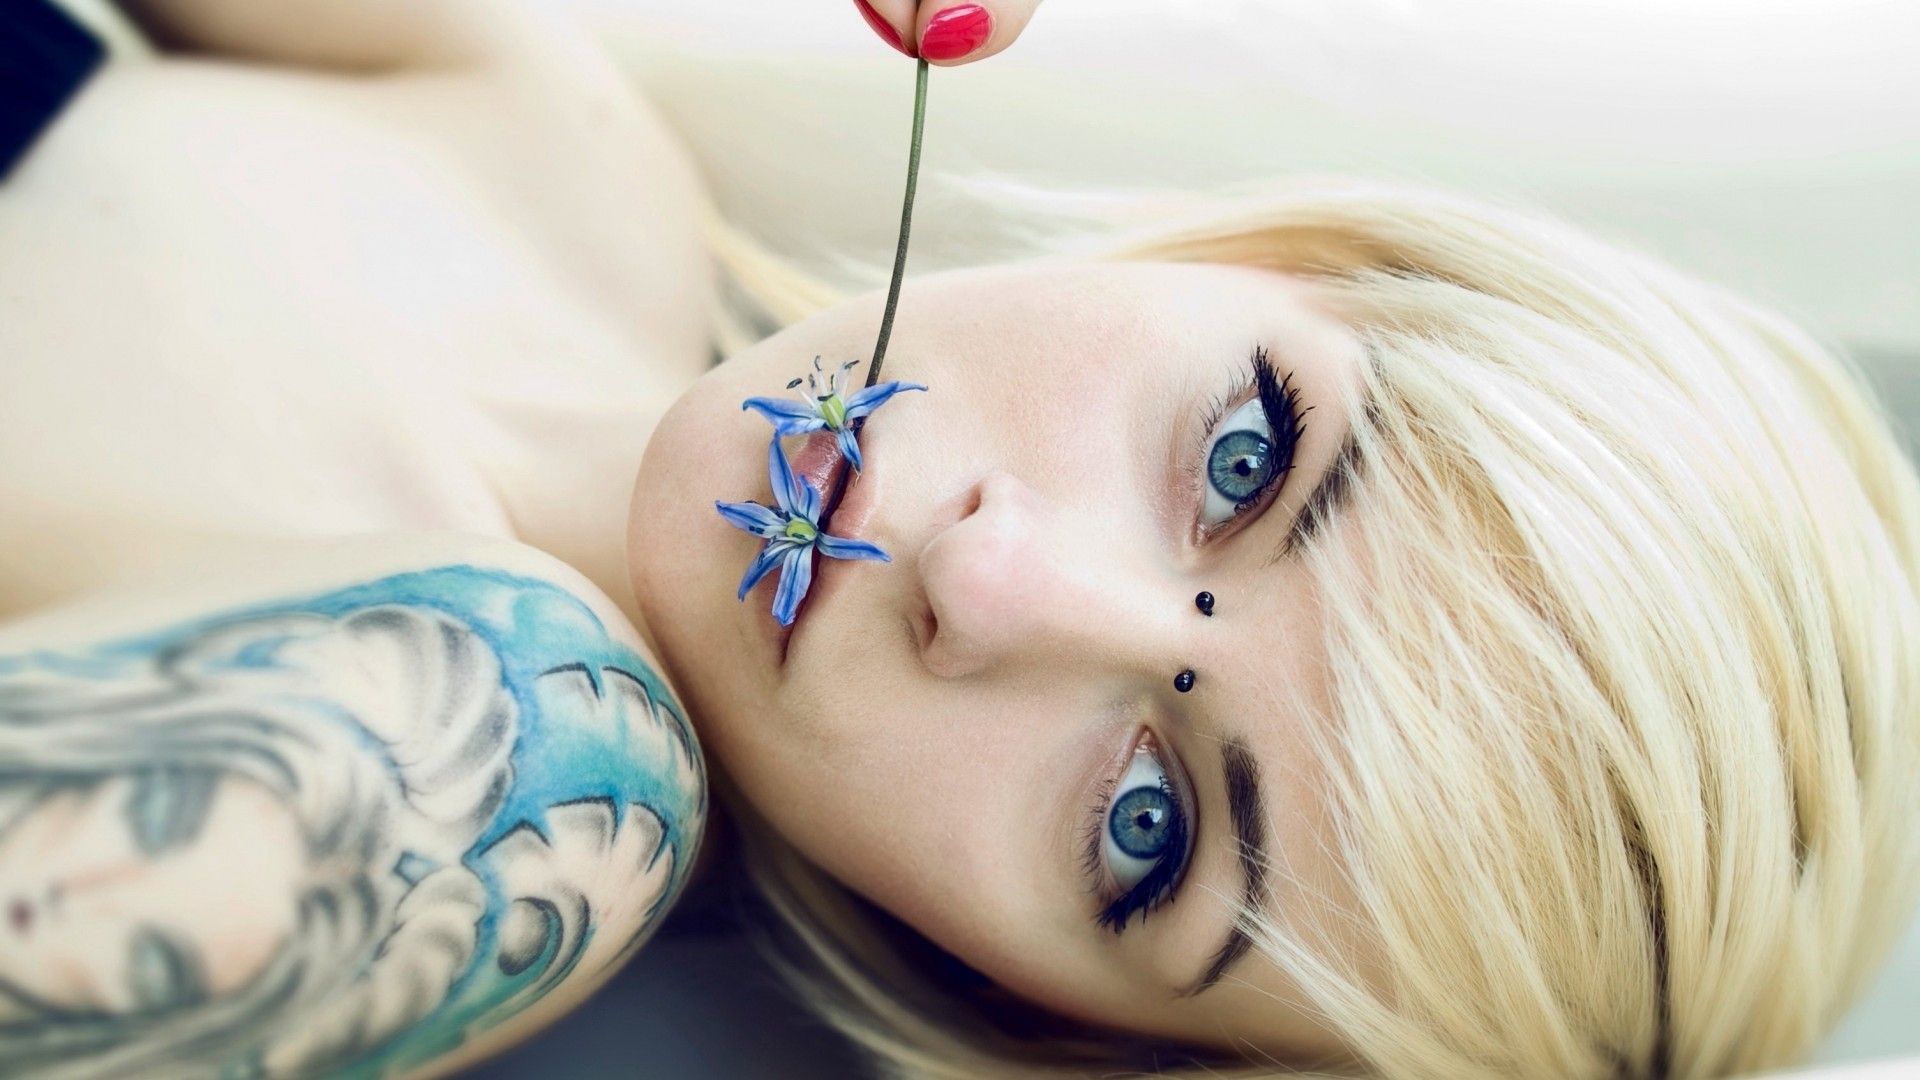 Most Beautiful Tattooed Girl Wallpaper Full HD Pictures